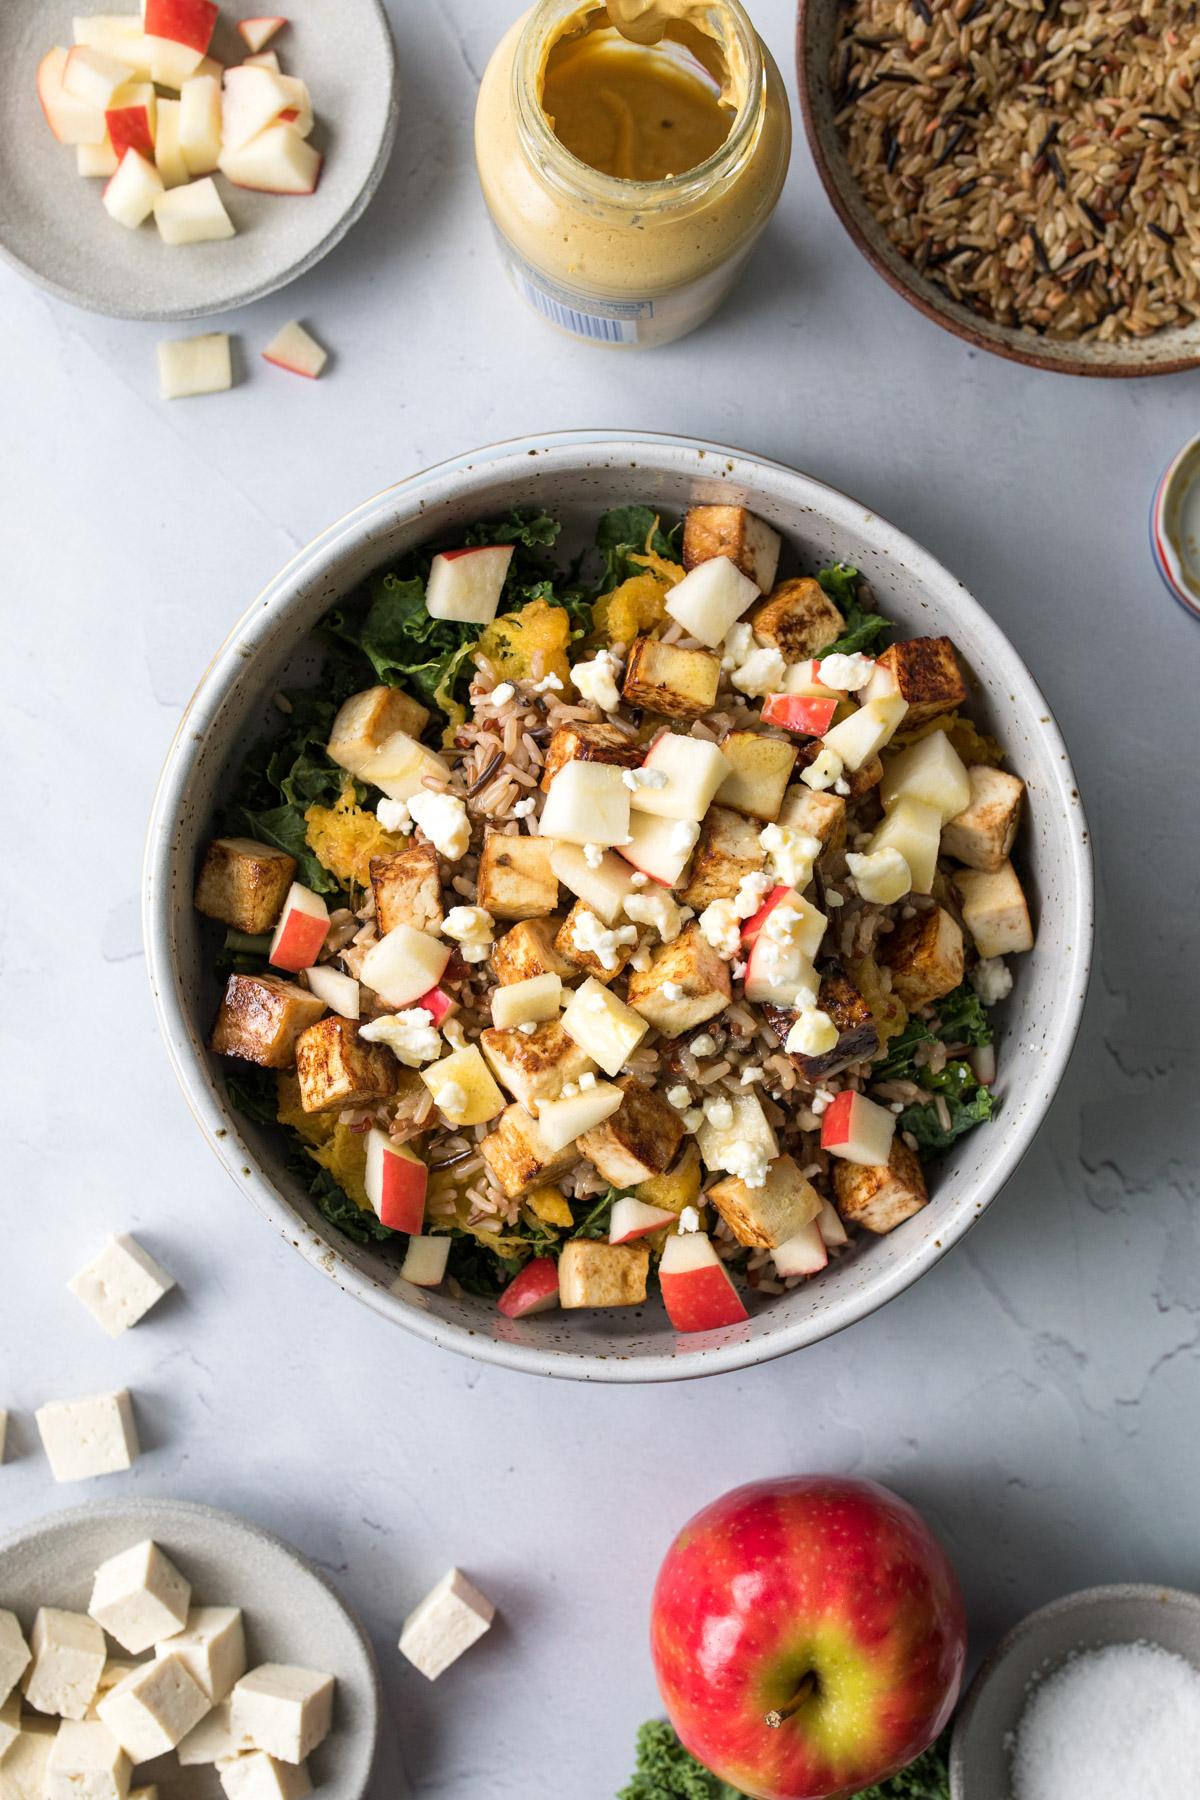 This warm harvest bowl with apples and maple glazed tofu includes all the classic fall flavors into this easy and nourishing vegetarian bowl. It's perfect for meal prep and lunch #vegetarian #fall #harvestbowl #wintersquash